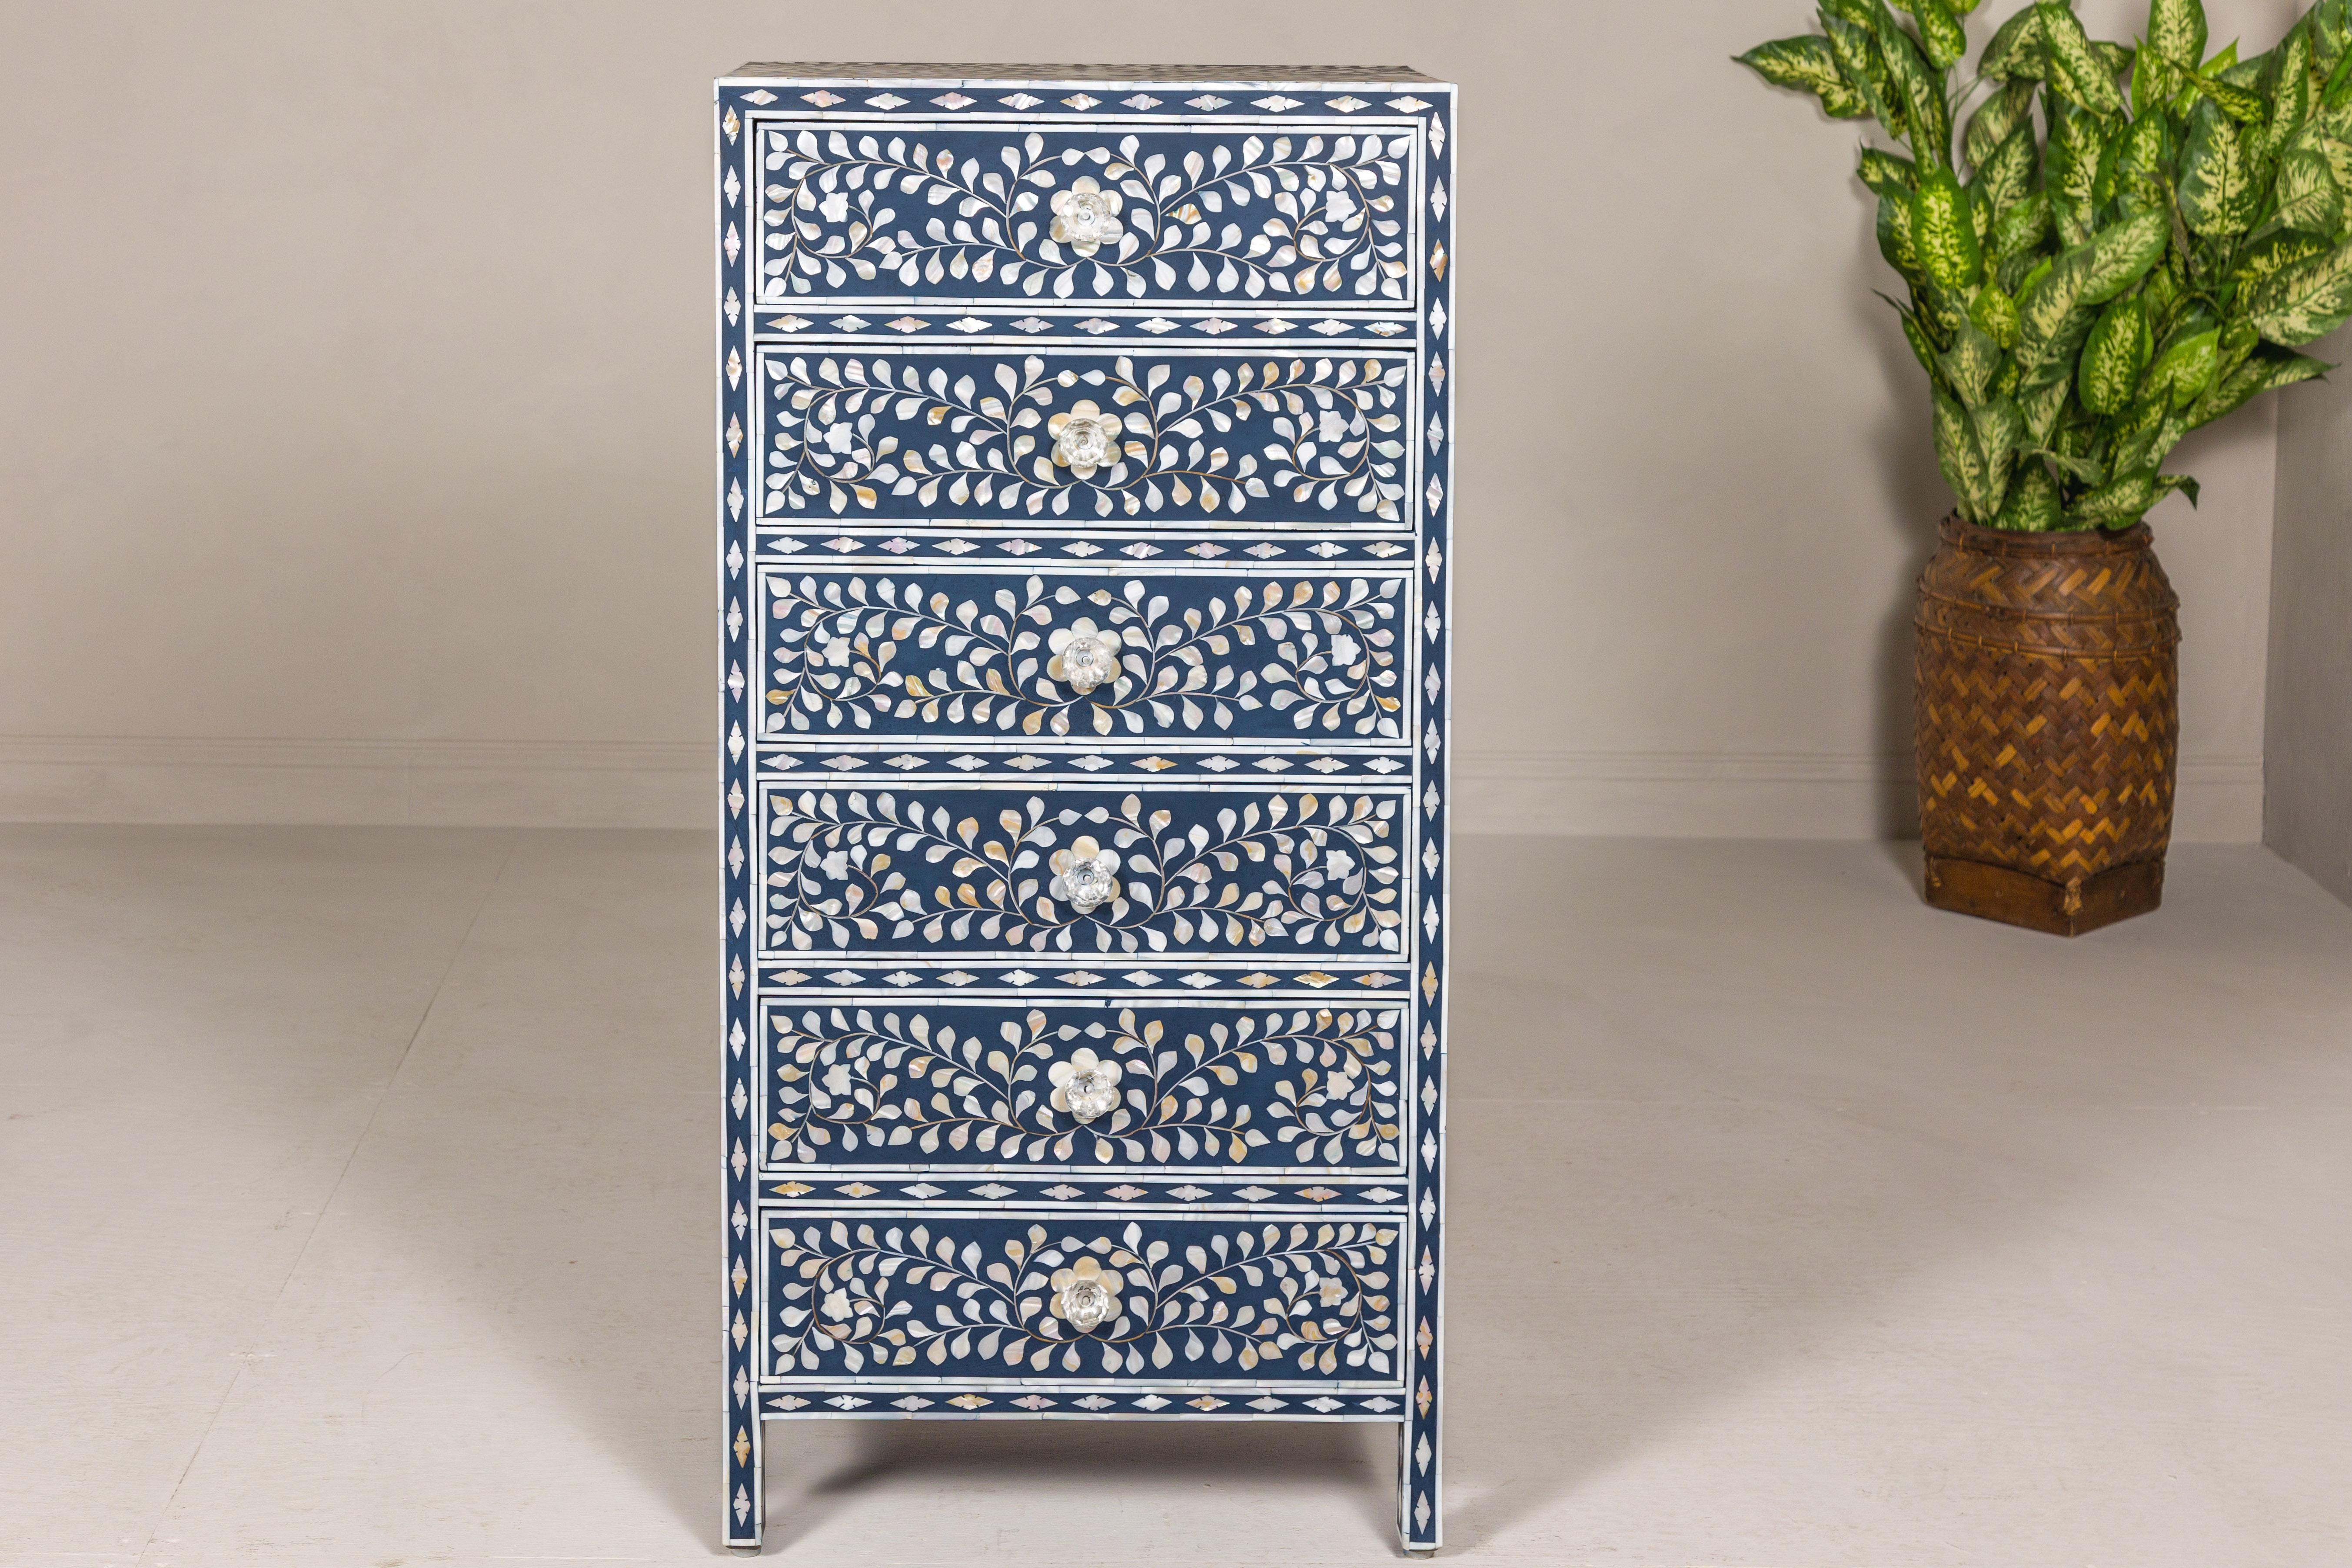 A blue and white Anglo-Indian style tall chest  with mother-of-pearl inlay, six drawers and scrollwork motifs. Introducing this stunning Anglo-Indian style tall chest, a sublime union of form and function that effortlessly marries the charmingly